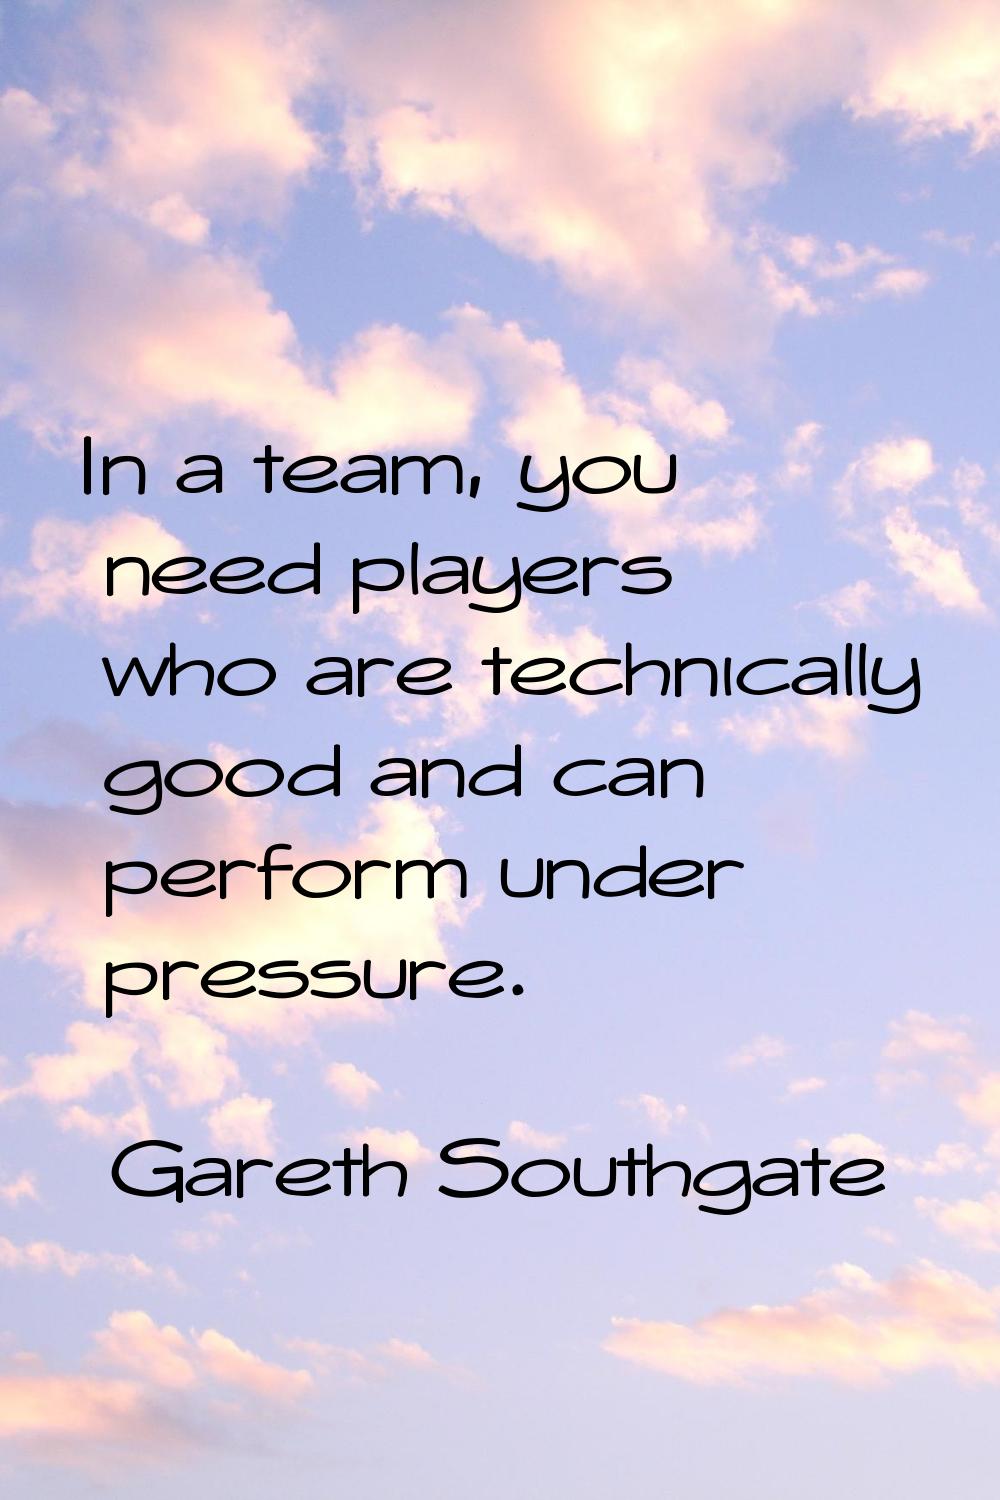 In a team, you need players who are technically good and can perform under pressure.